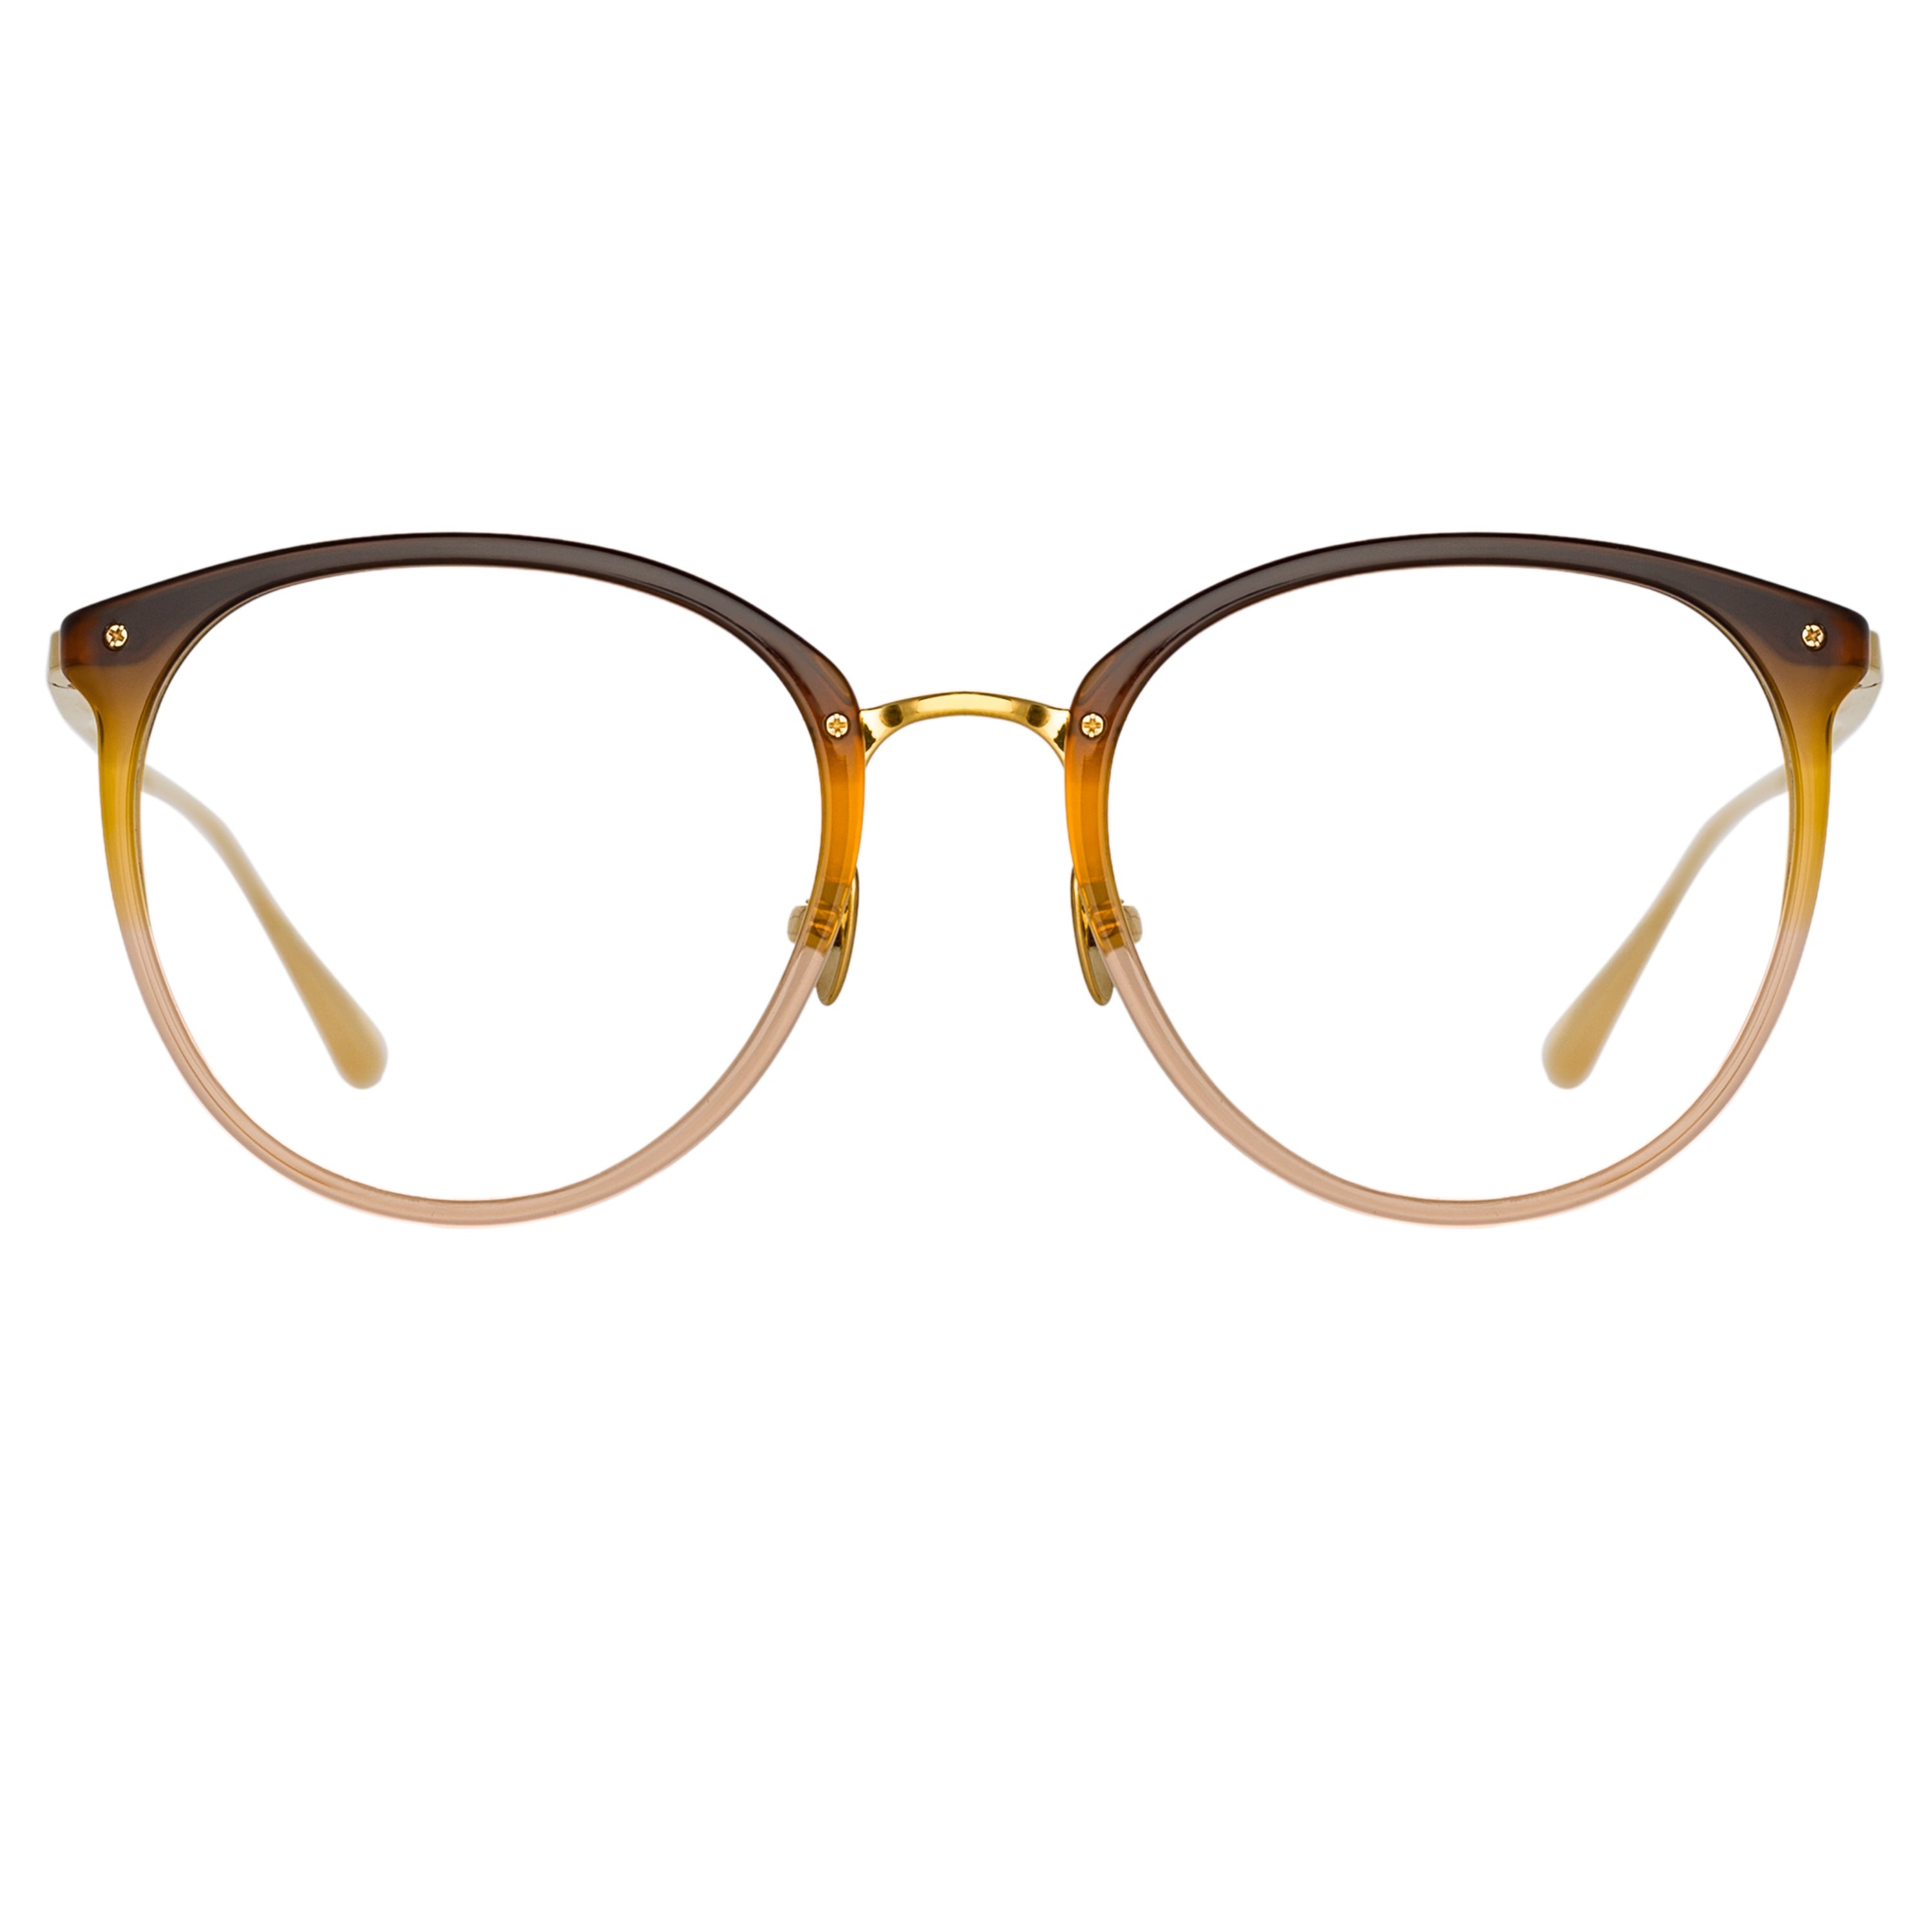 CALTHORPE OVAL OPTICAL FRAME IN BROWN GRADIENT - 1